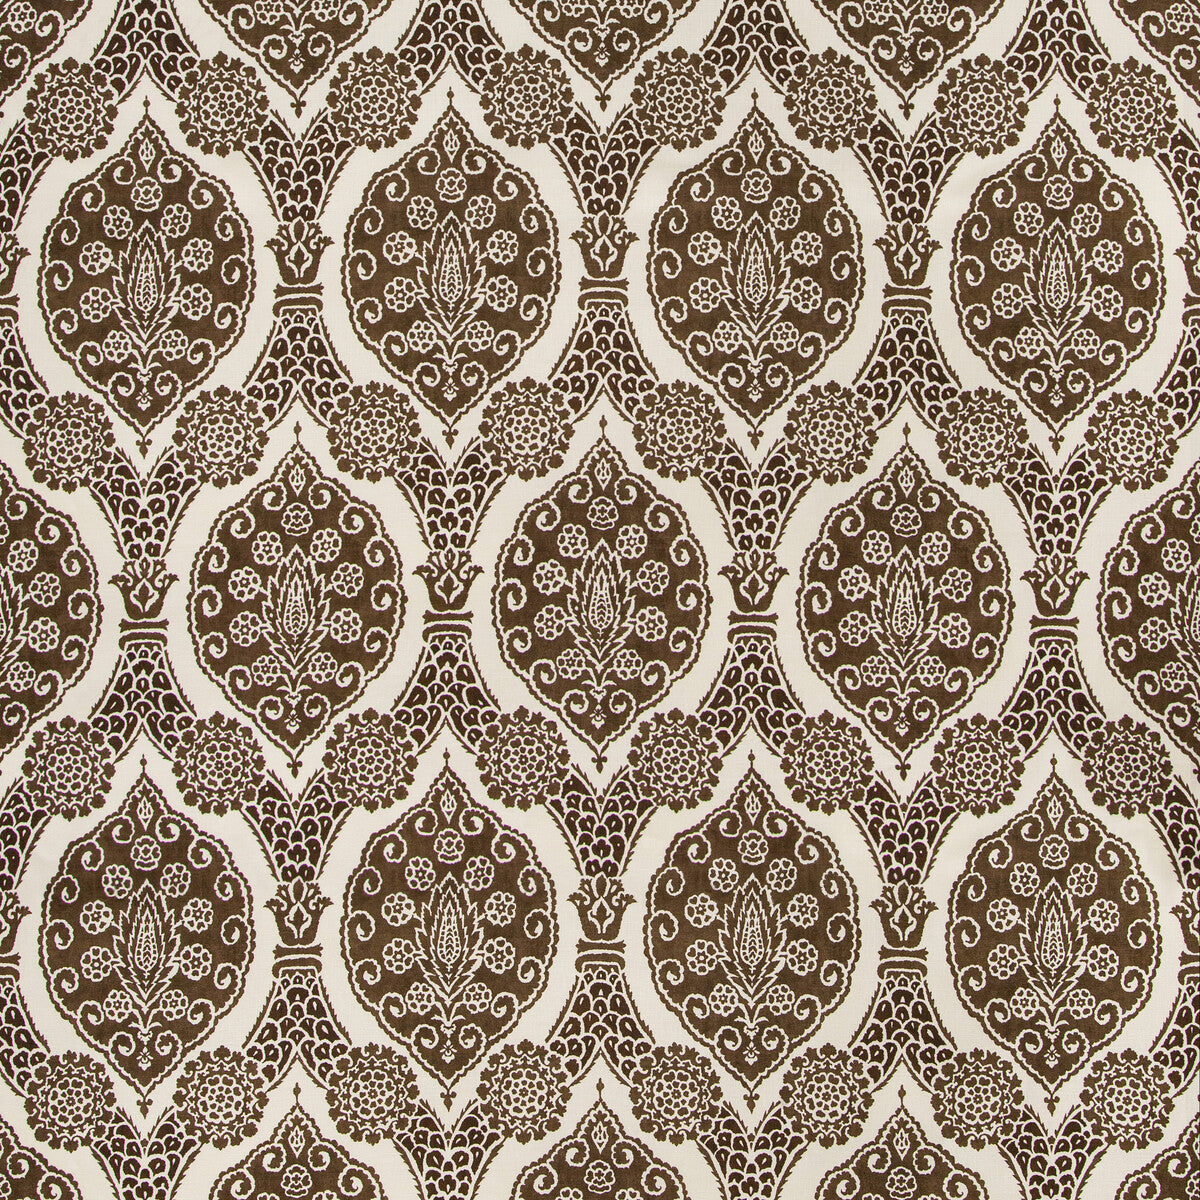 Sufera Print fabric in chocolate color - pattern 8020103.6.0 - by Brunschwig &amp; Fils in the Grand Bazaar collection